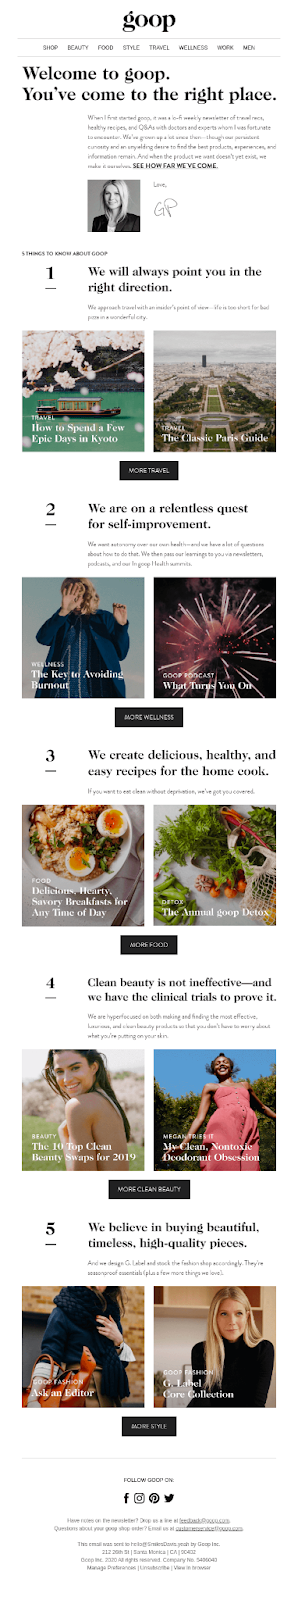 Health & wellness email examples from goop.